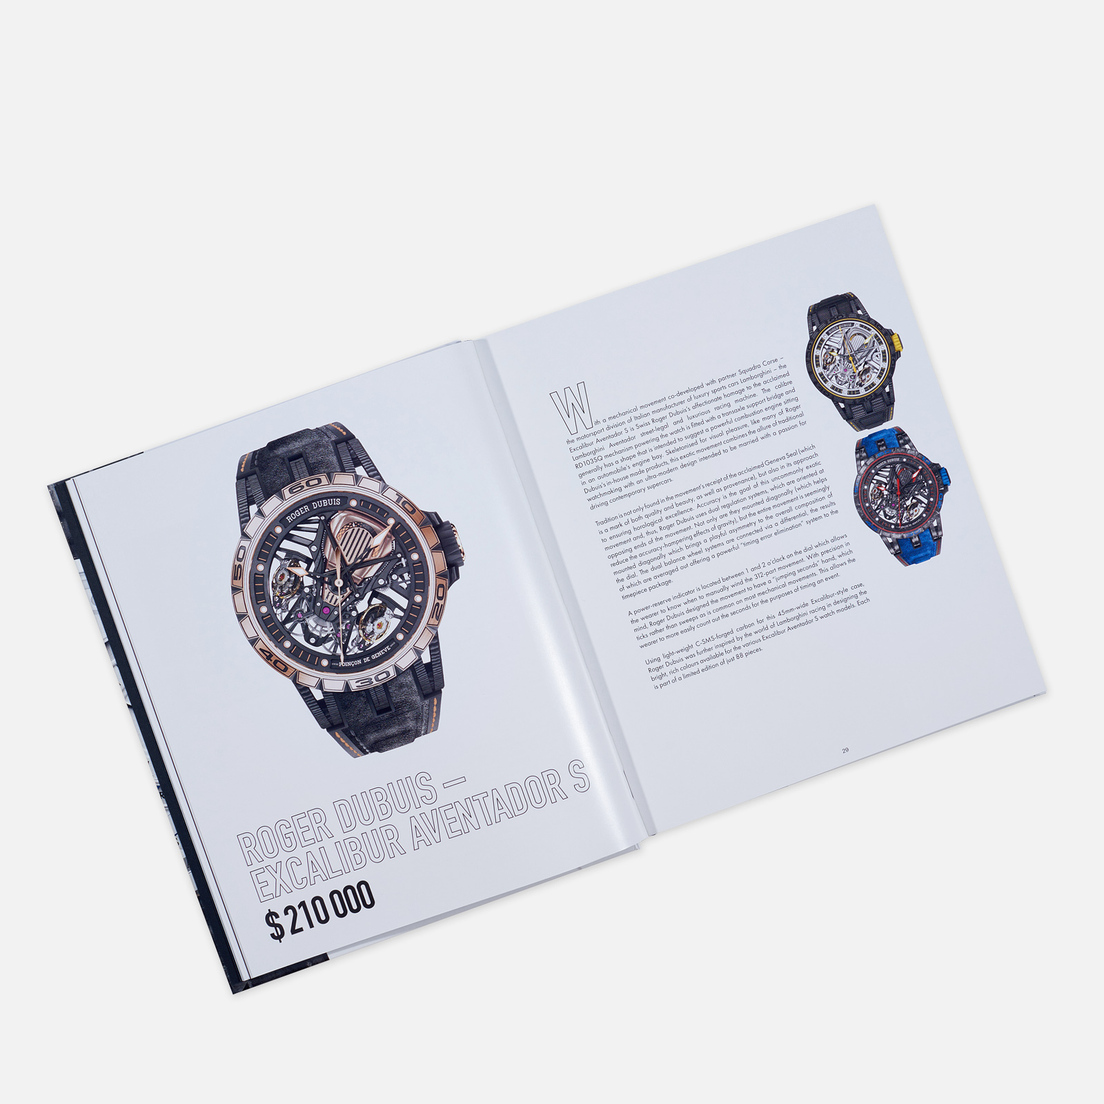 ACC Art Books Книга The World’s Most Expensive Watches